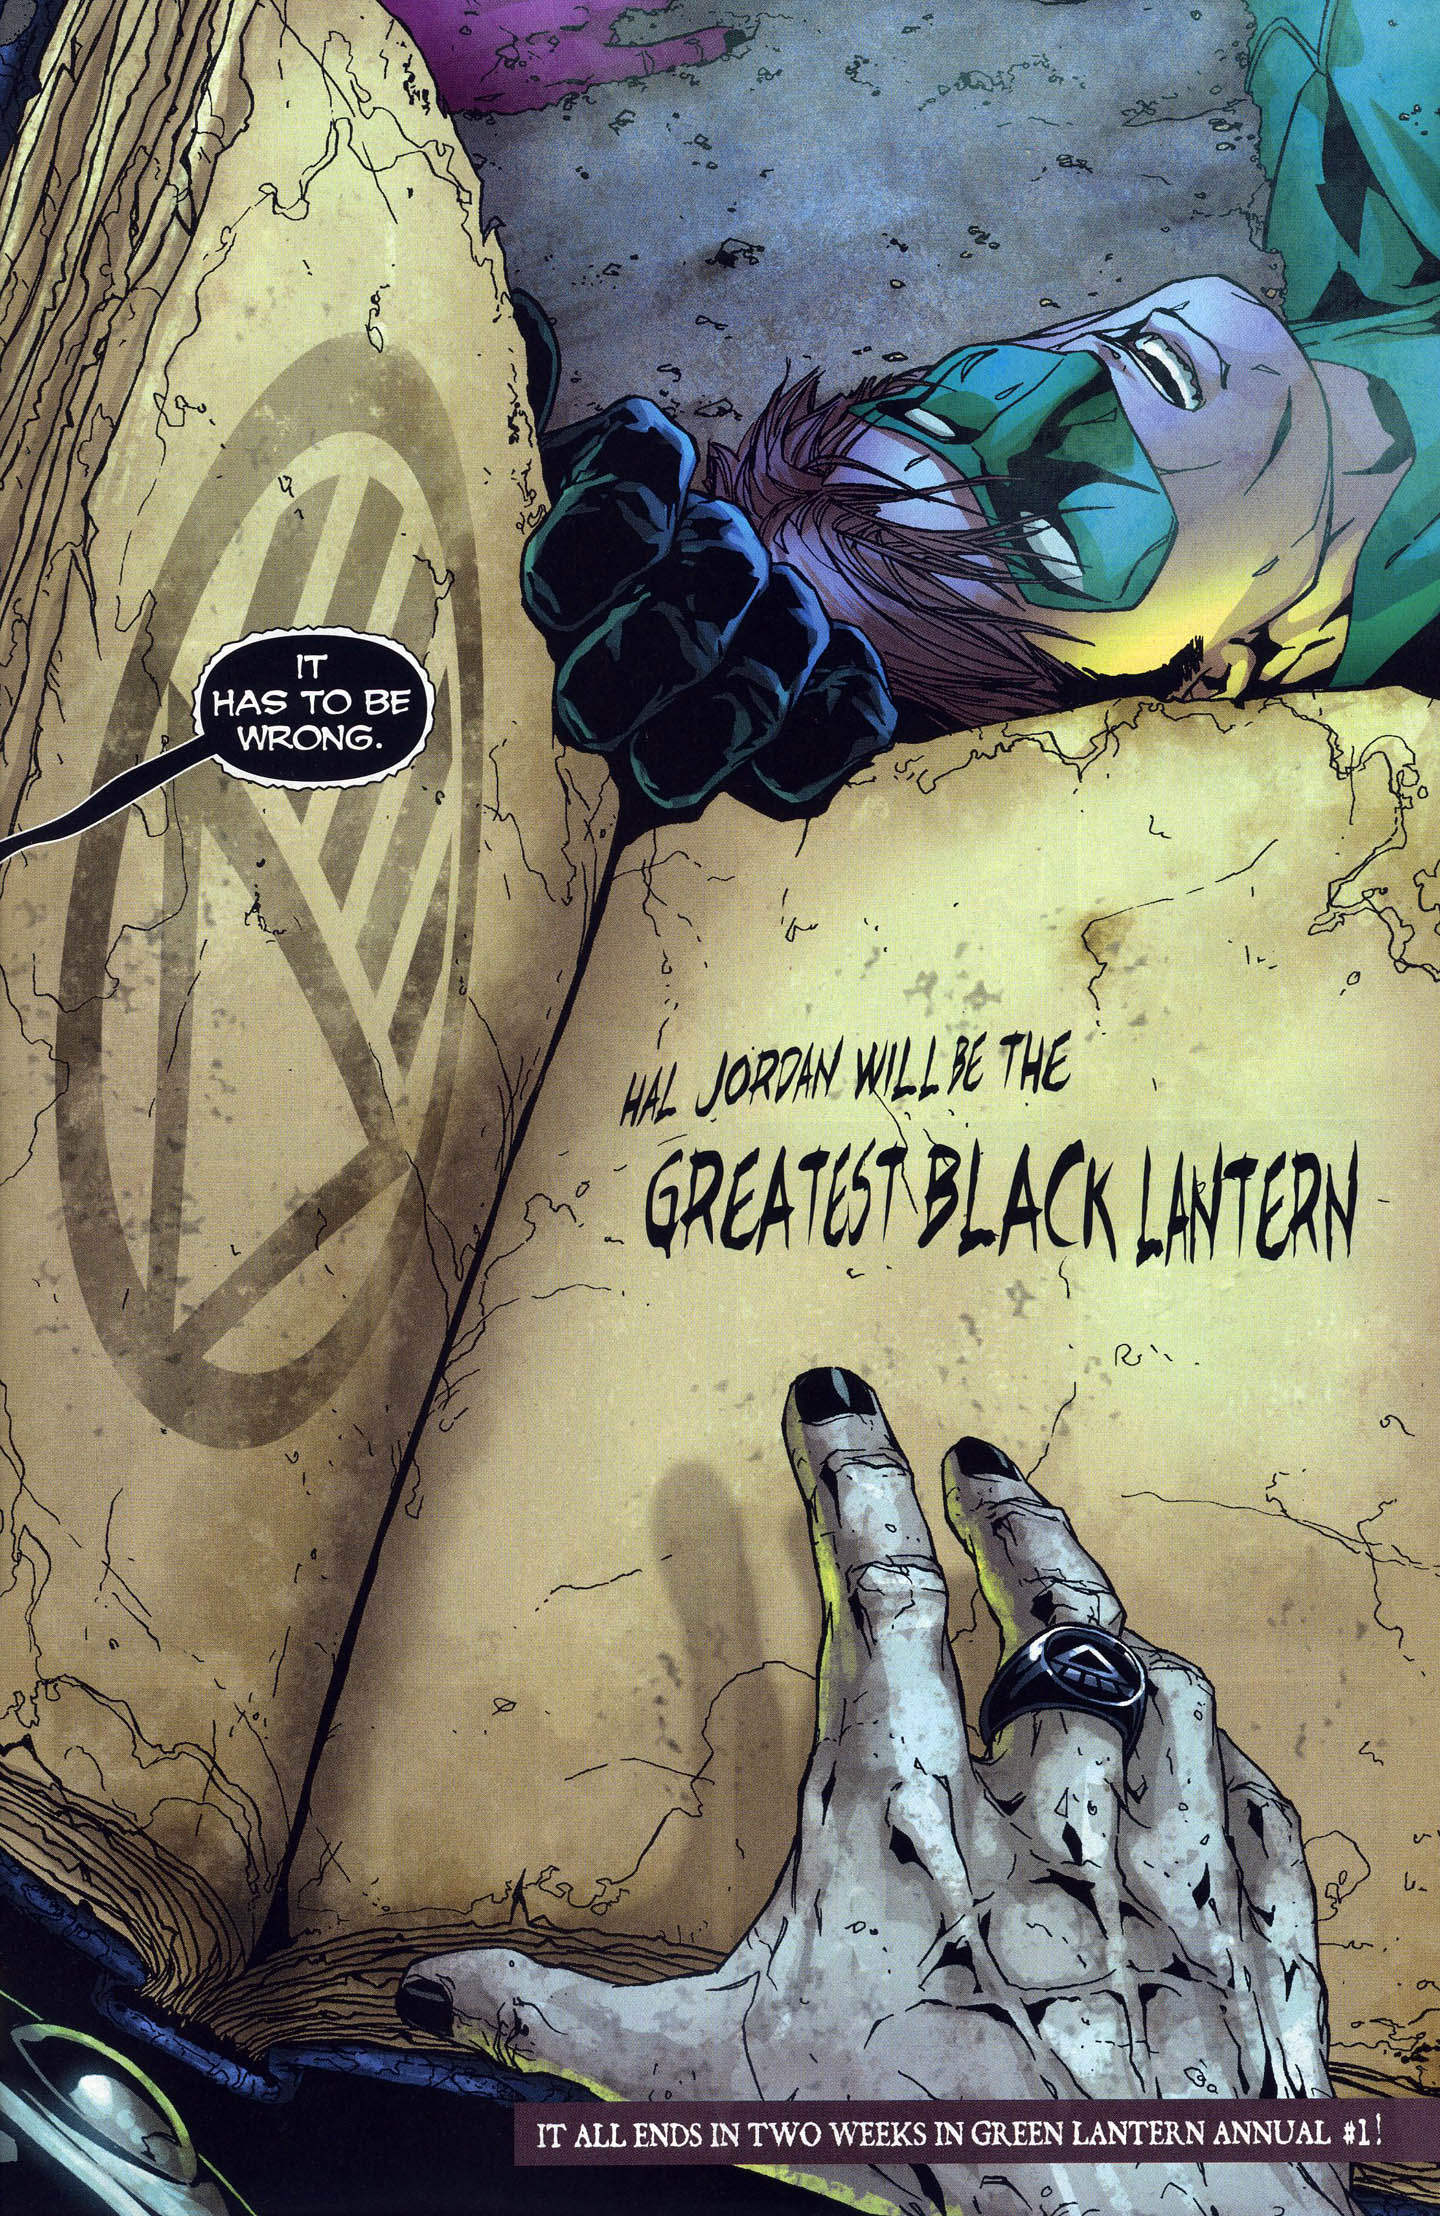 The Book Of The Black's Prophecy On Hal Jordan 